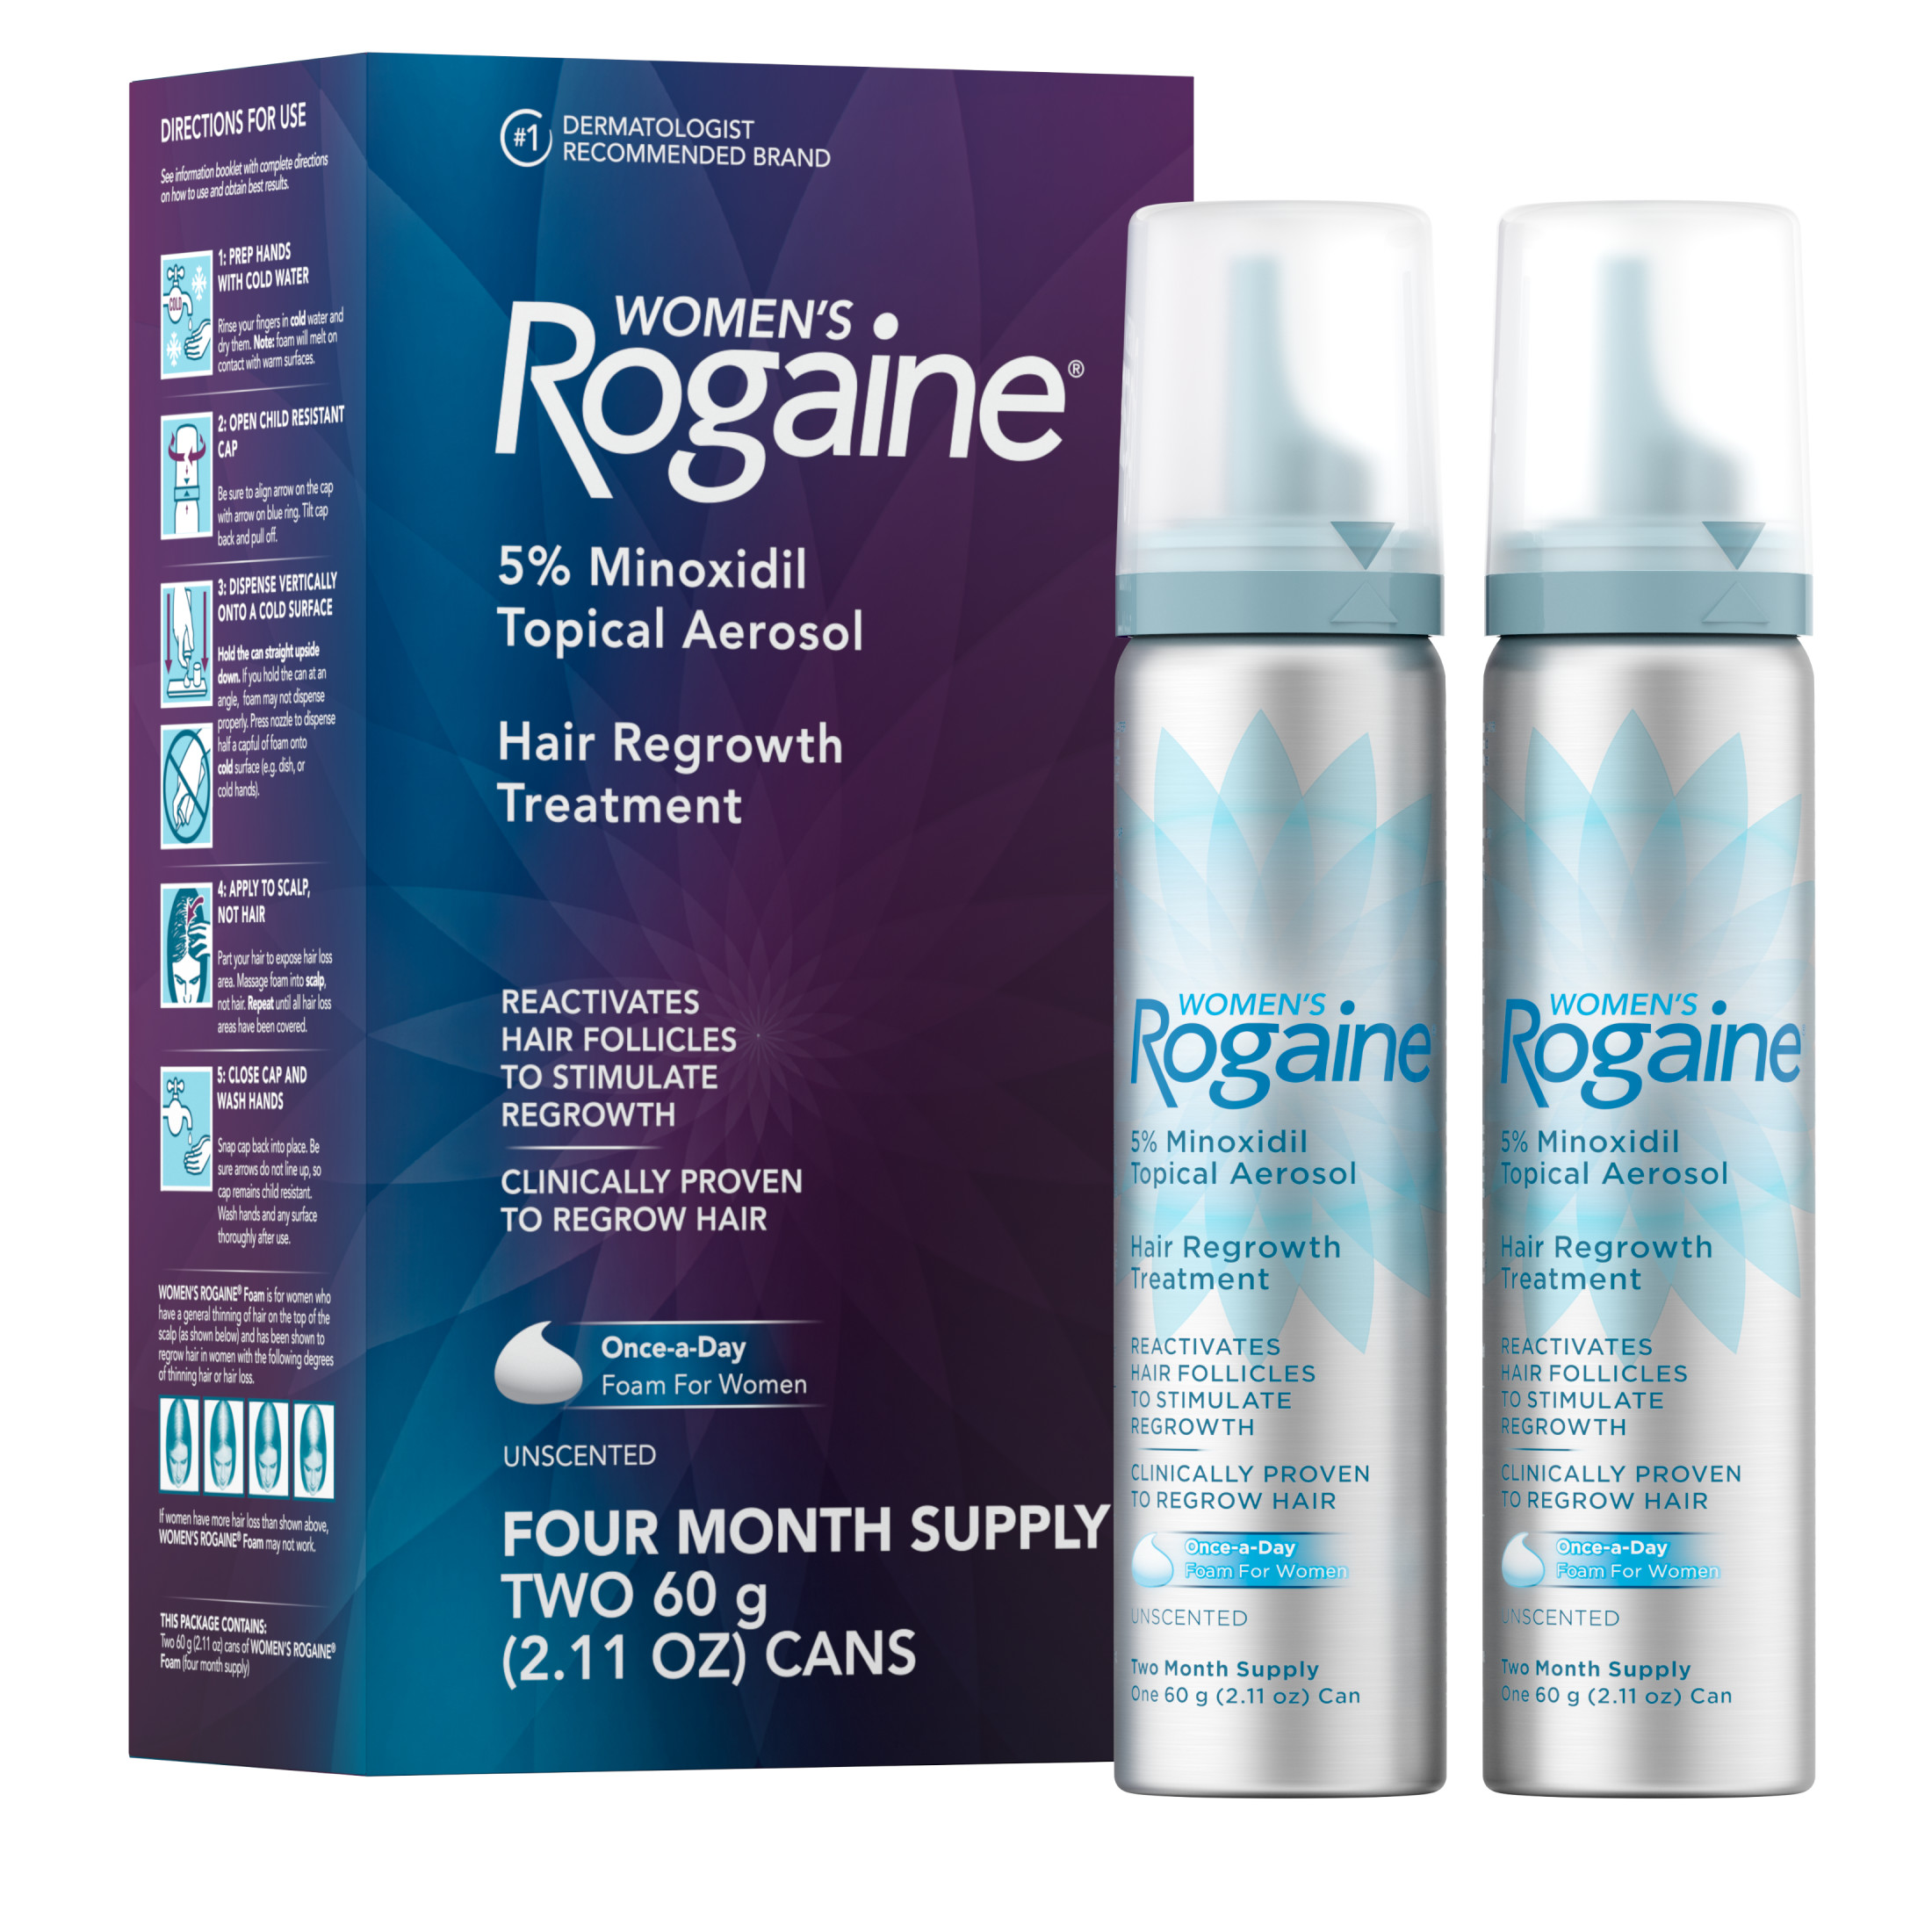 Women's Rogaine 5% Minoxidil Foam, Unscented, 4-Month Supply - image 1 of 8